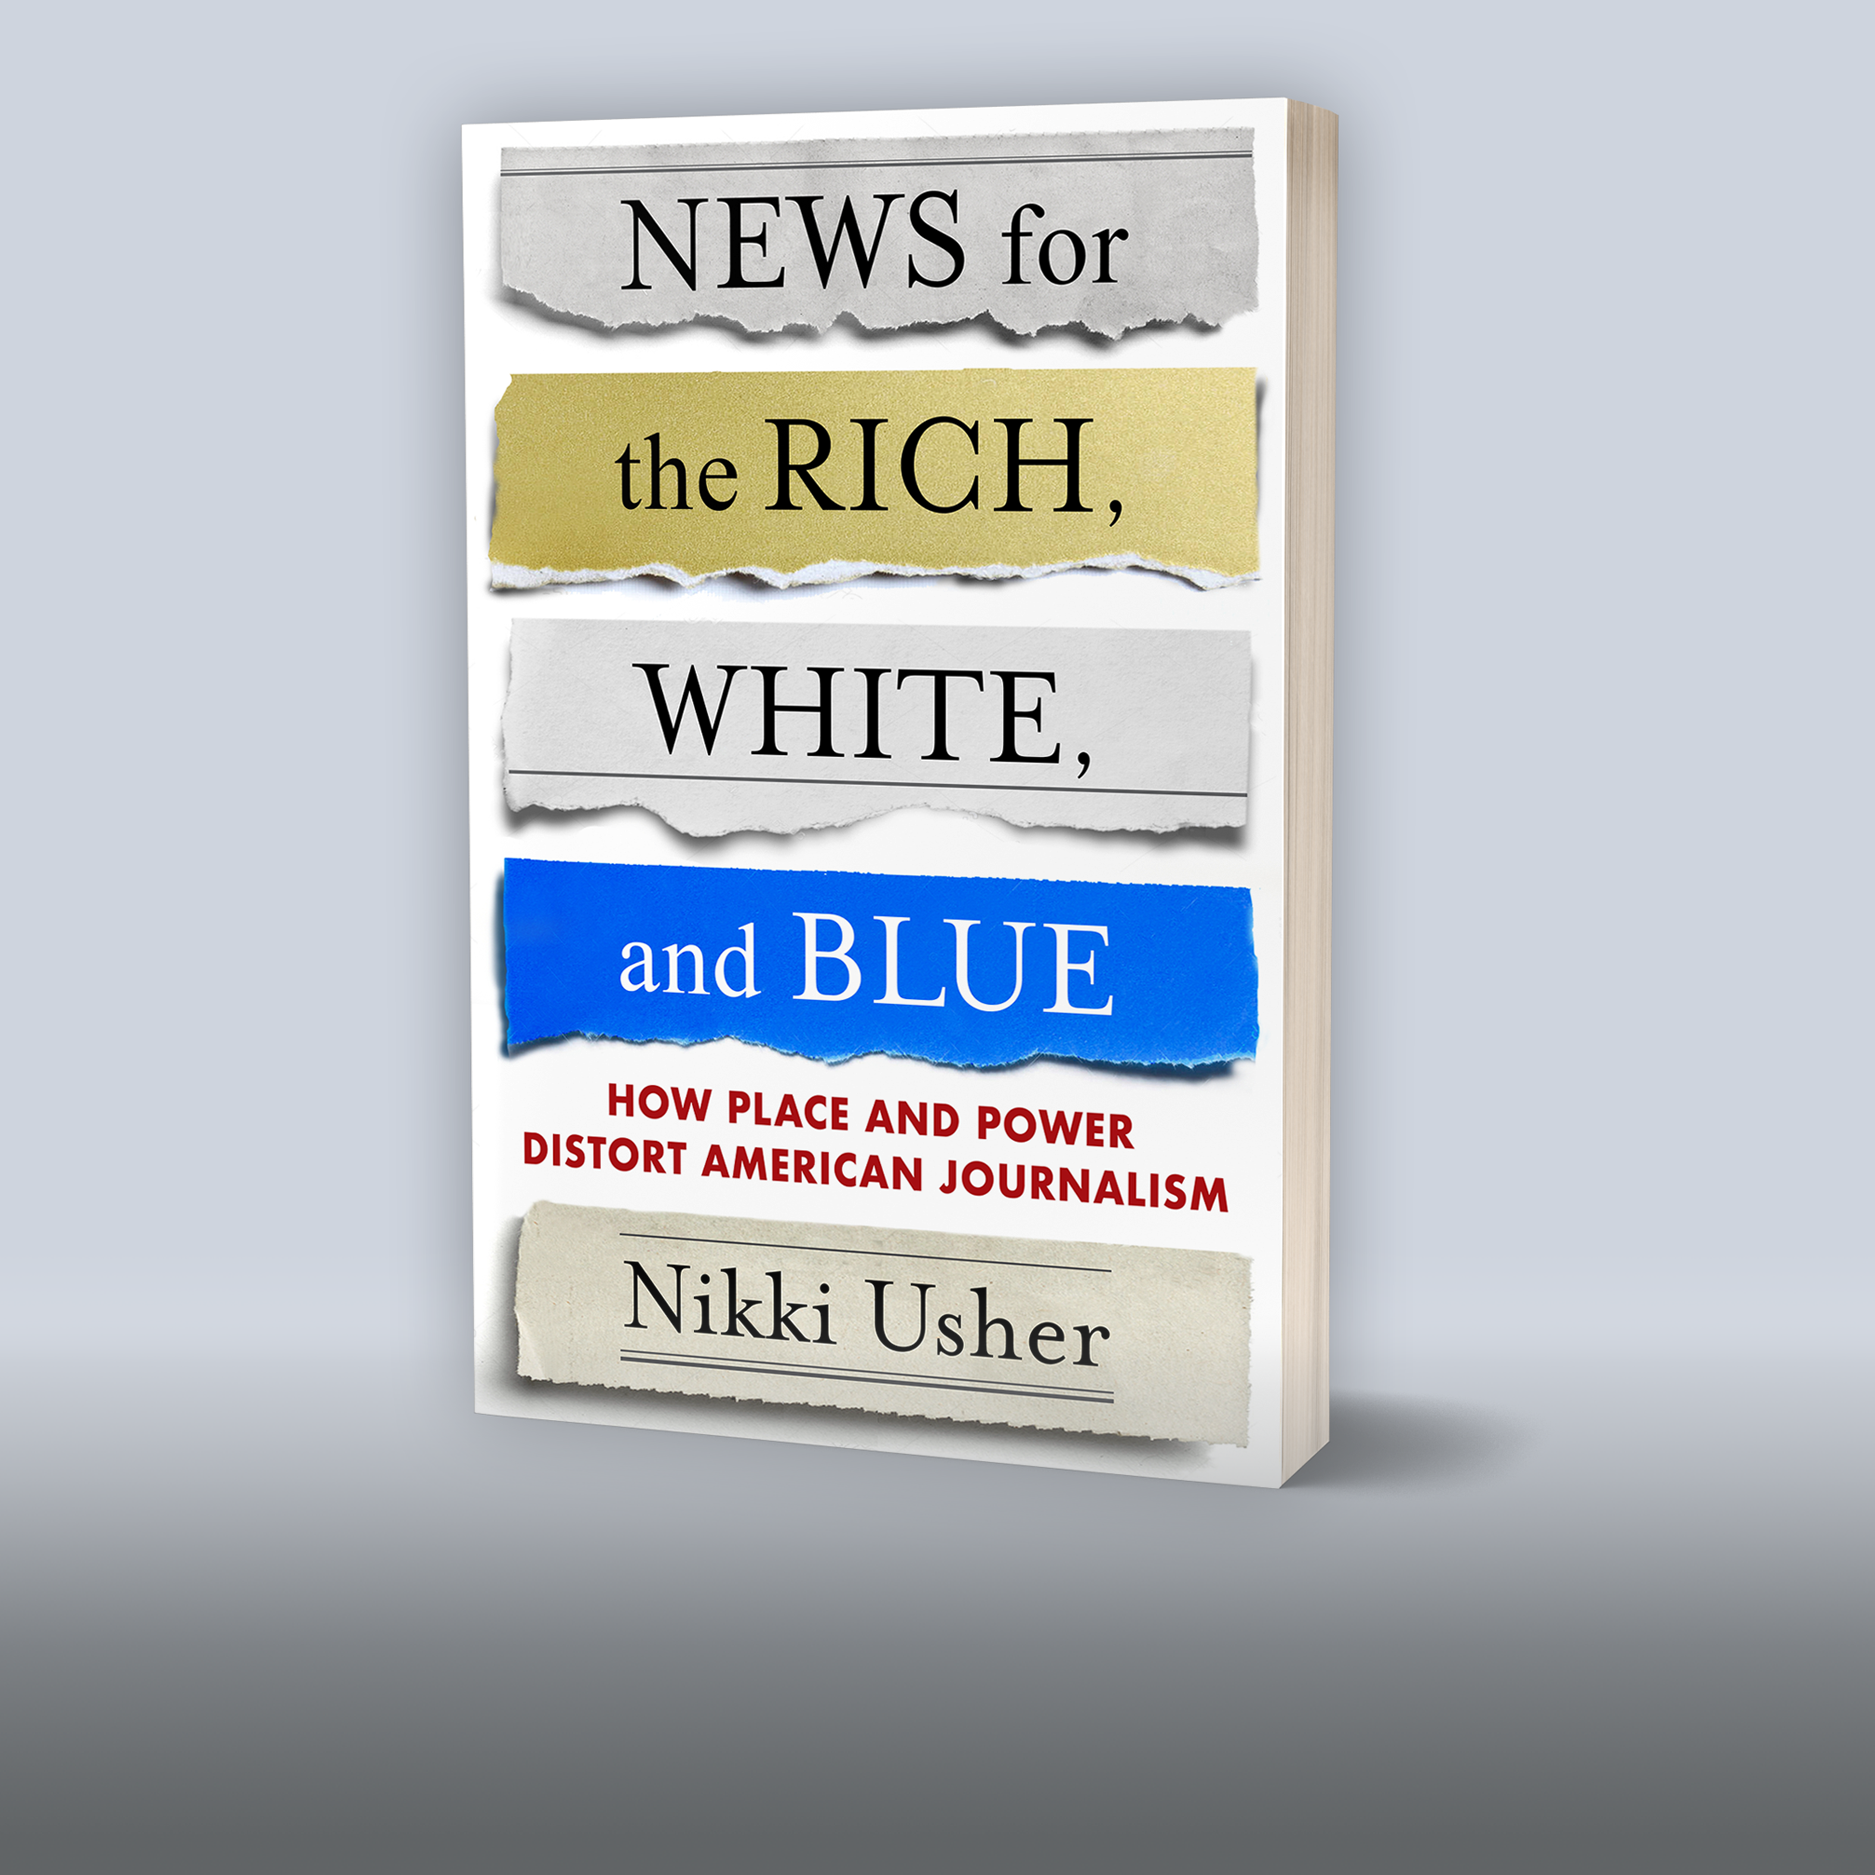  One of our senior fellows,   Nikki Usher     published a new book,    News for the Rich, White, and Blue: How Place and Power Distort American Journalism   , offering a frank examination of the inequalities driving not just America’s journalism cris